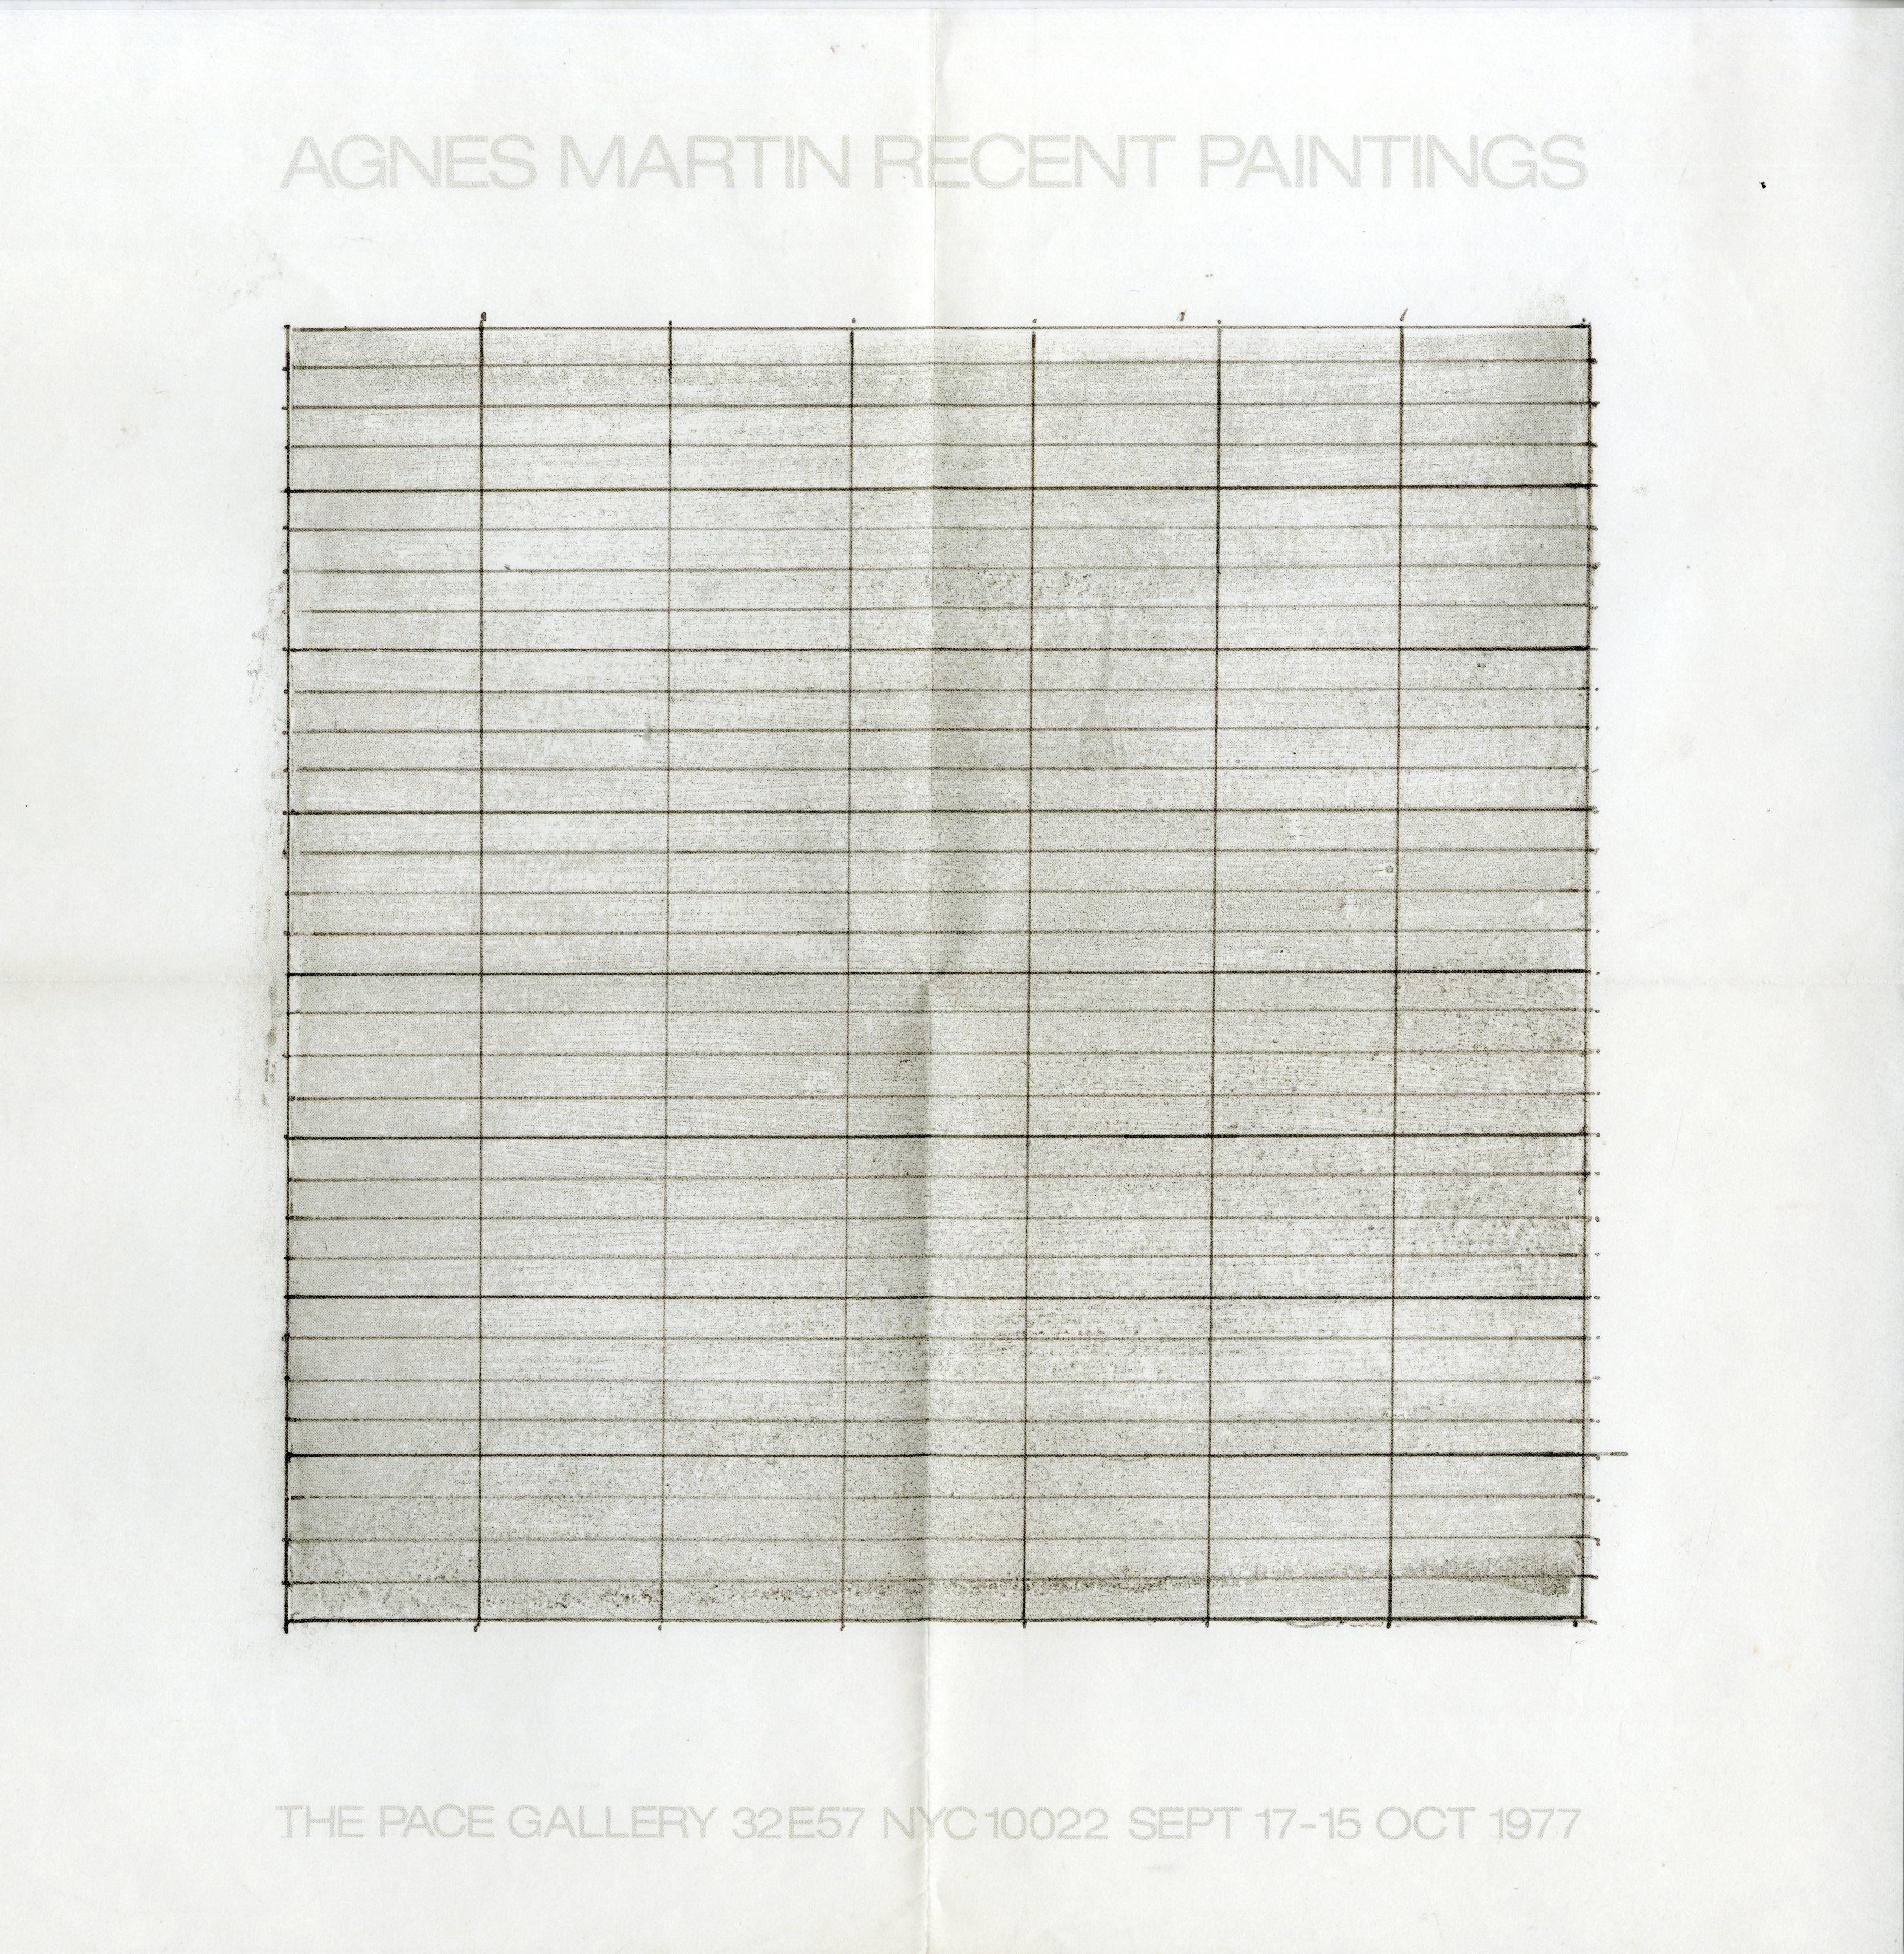 Agnes Martin Recent Paintings Limited Edition 1977 PACE Gallery invite on vellum